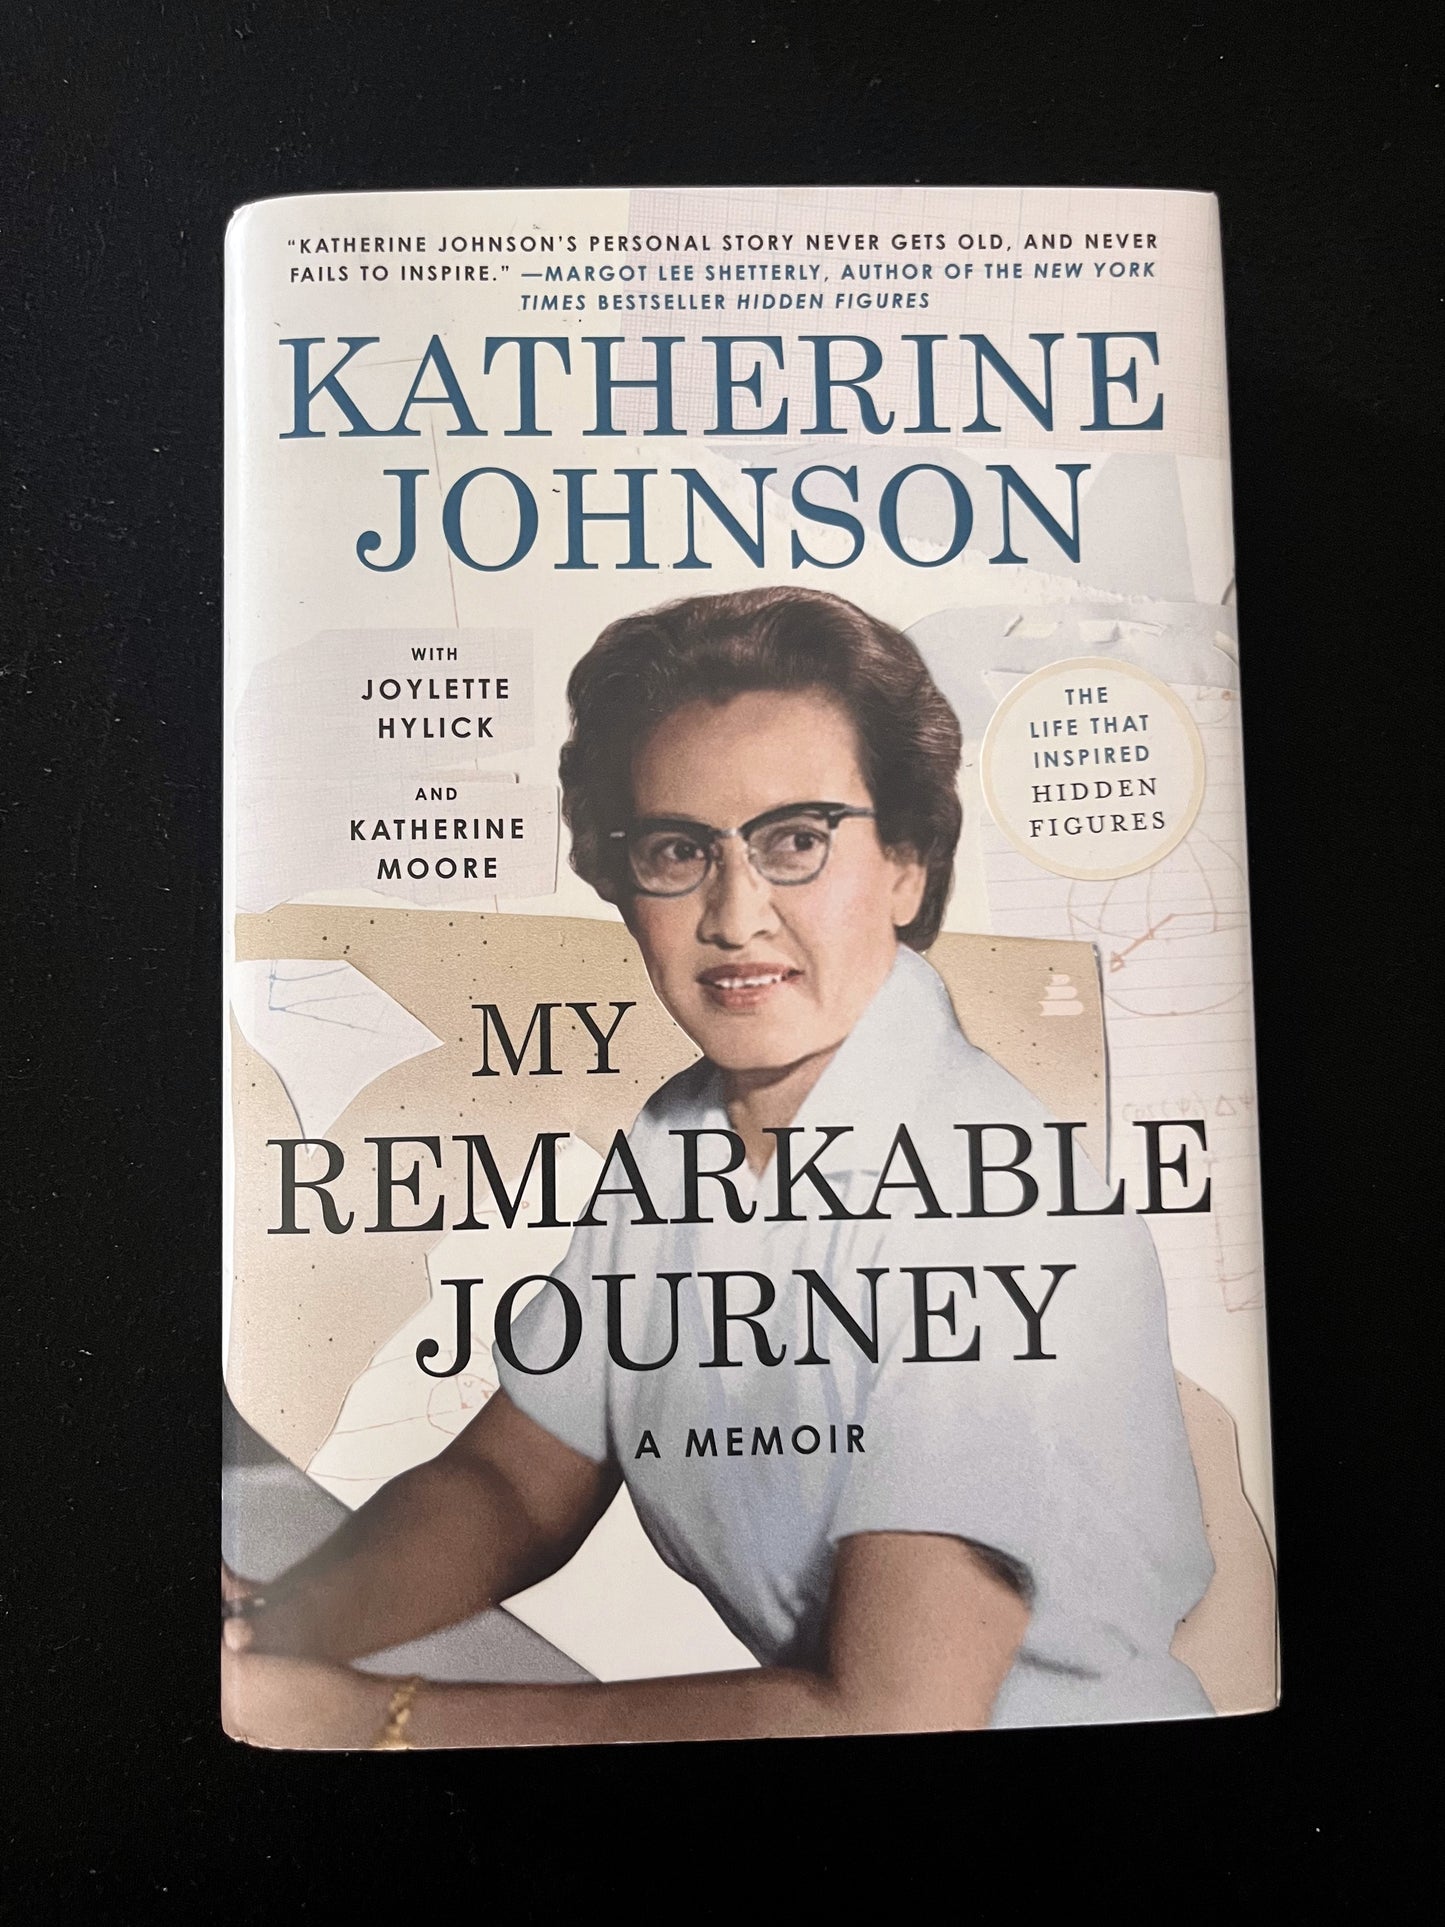 MY REMARKABLE JOURNEY by Katherine Johnson